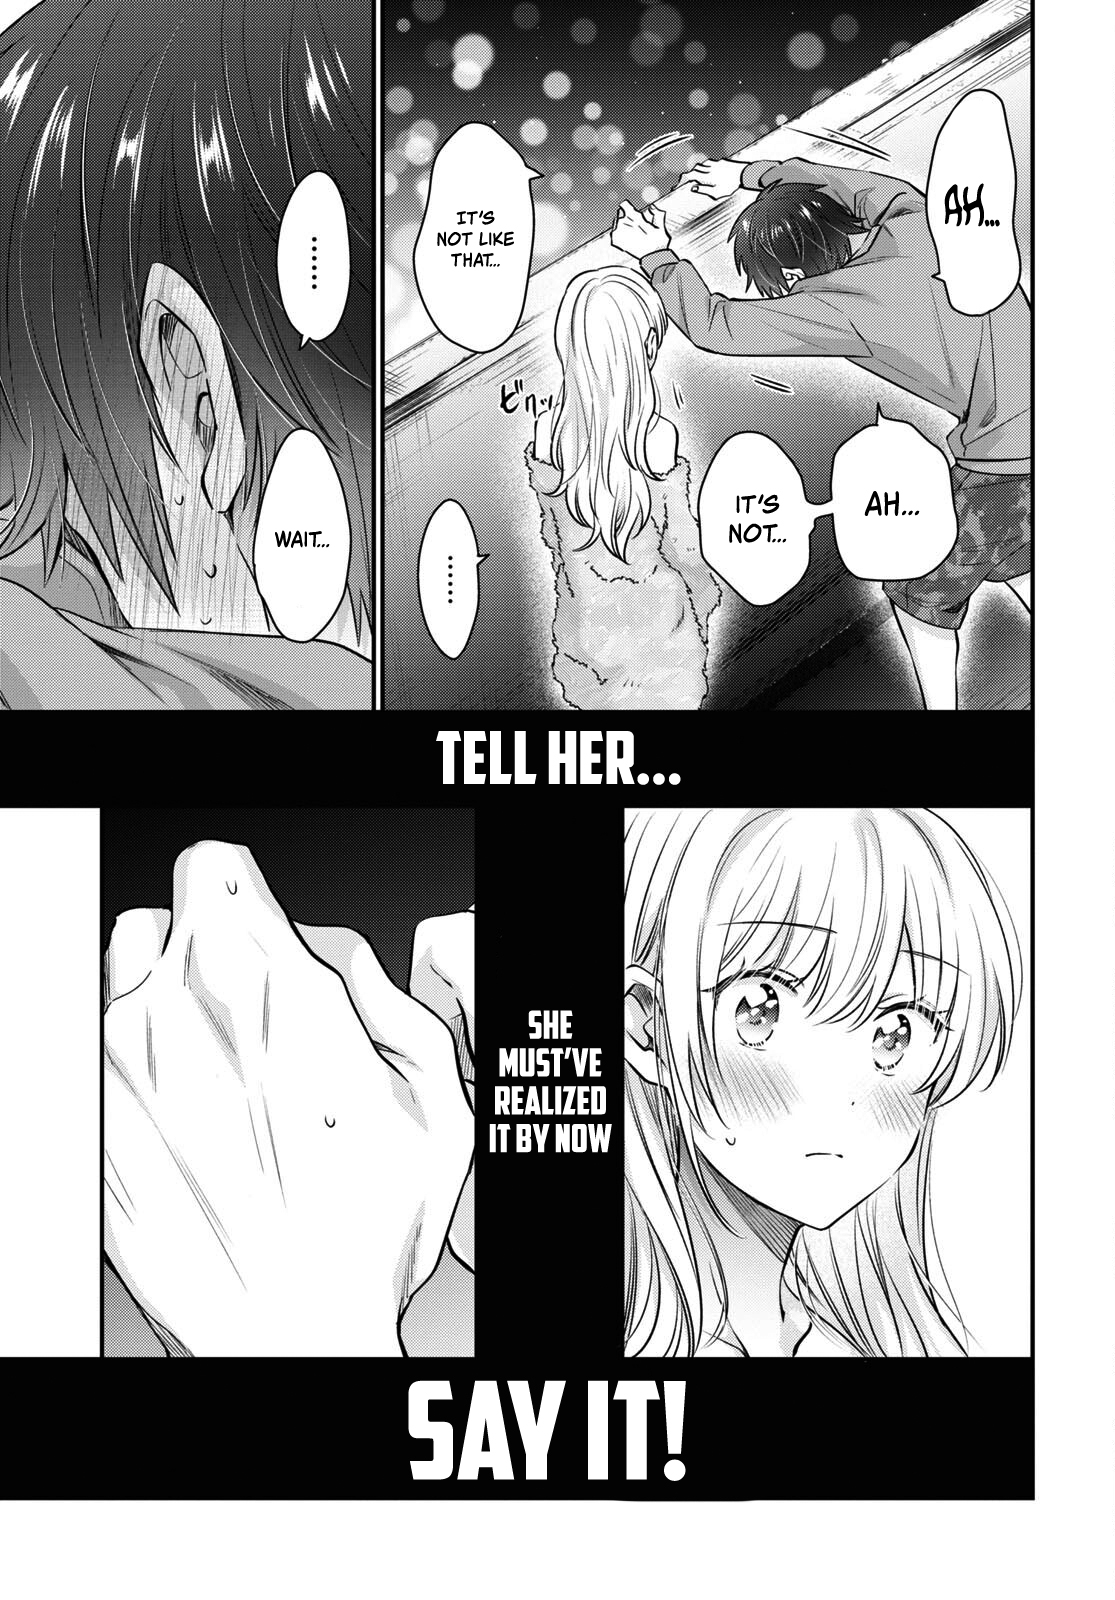 Fuufu Ijou, Koibito Miman. Chapter 64: It's All Summer's Fault. 